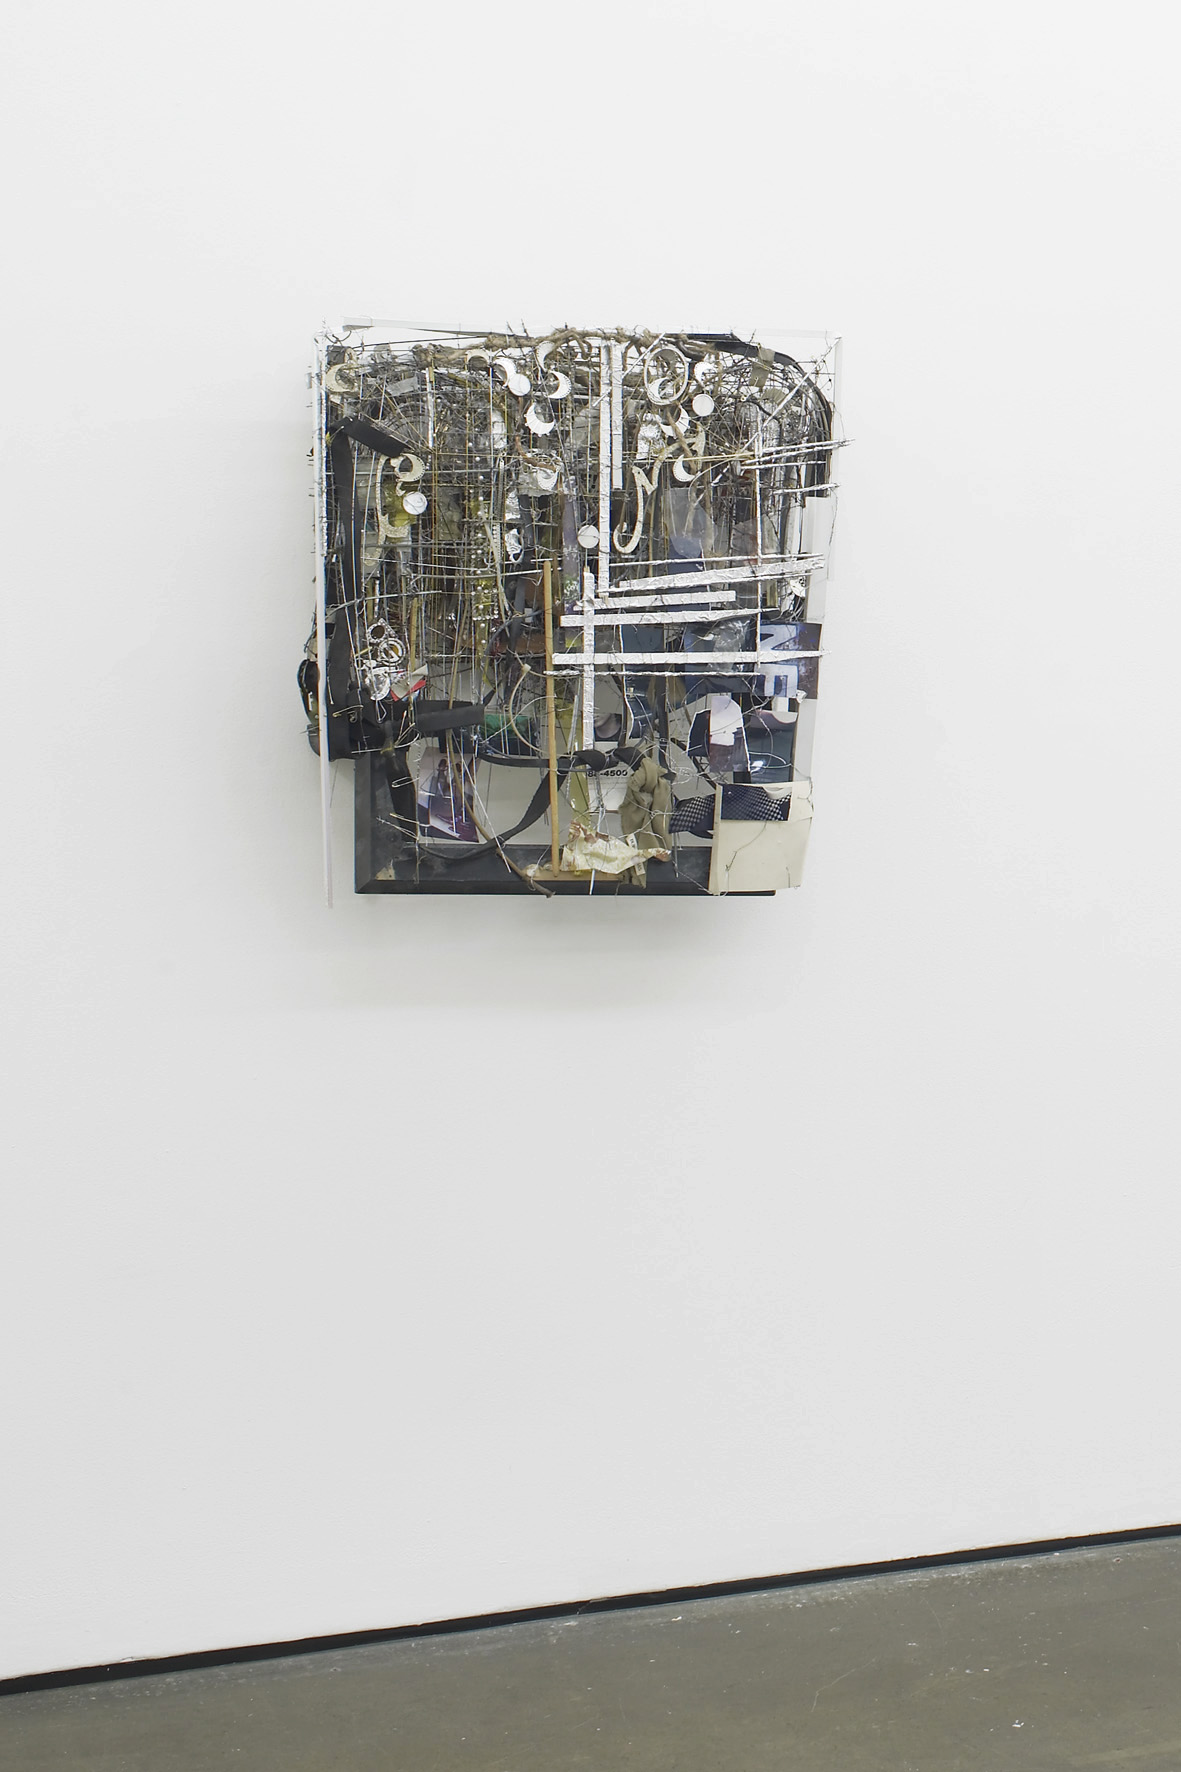     Robert Bittenbender Passion Avenue 2015 Wood, steel, photographs, aluminium, plastic, acrylic glass, jewelry, rubber, rope, paper, clothespins, zipties, metal wires,chains, assorted tubes, bottles 80 × 67 × 22 cm / 31.5 × 26.3 × 8.6 in HS12-RB545